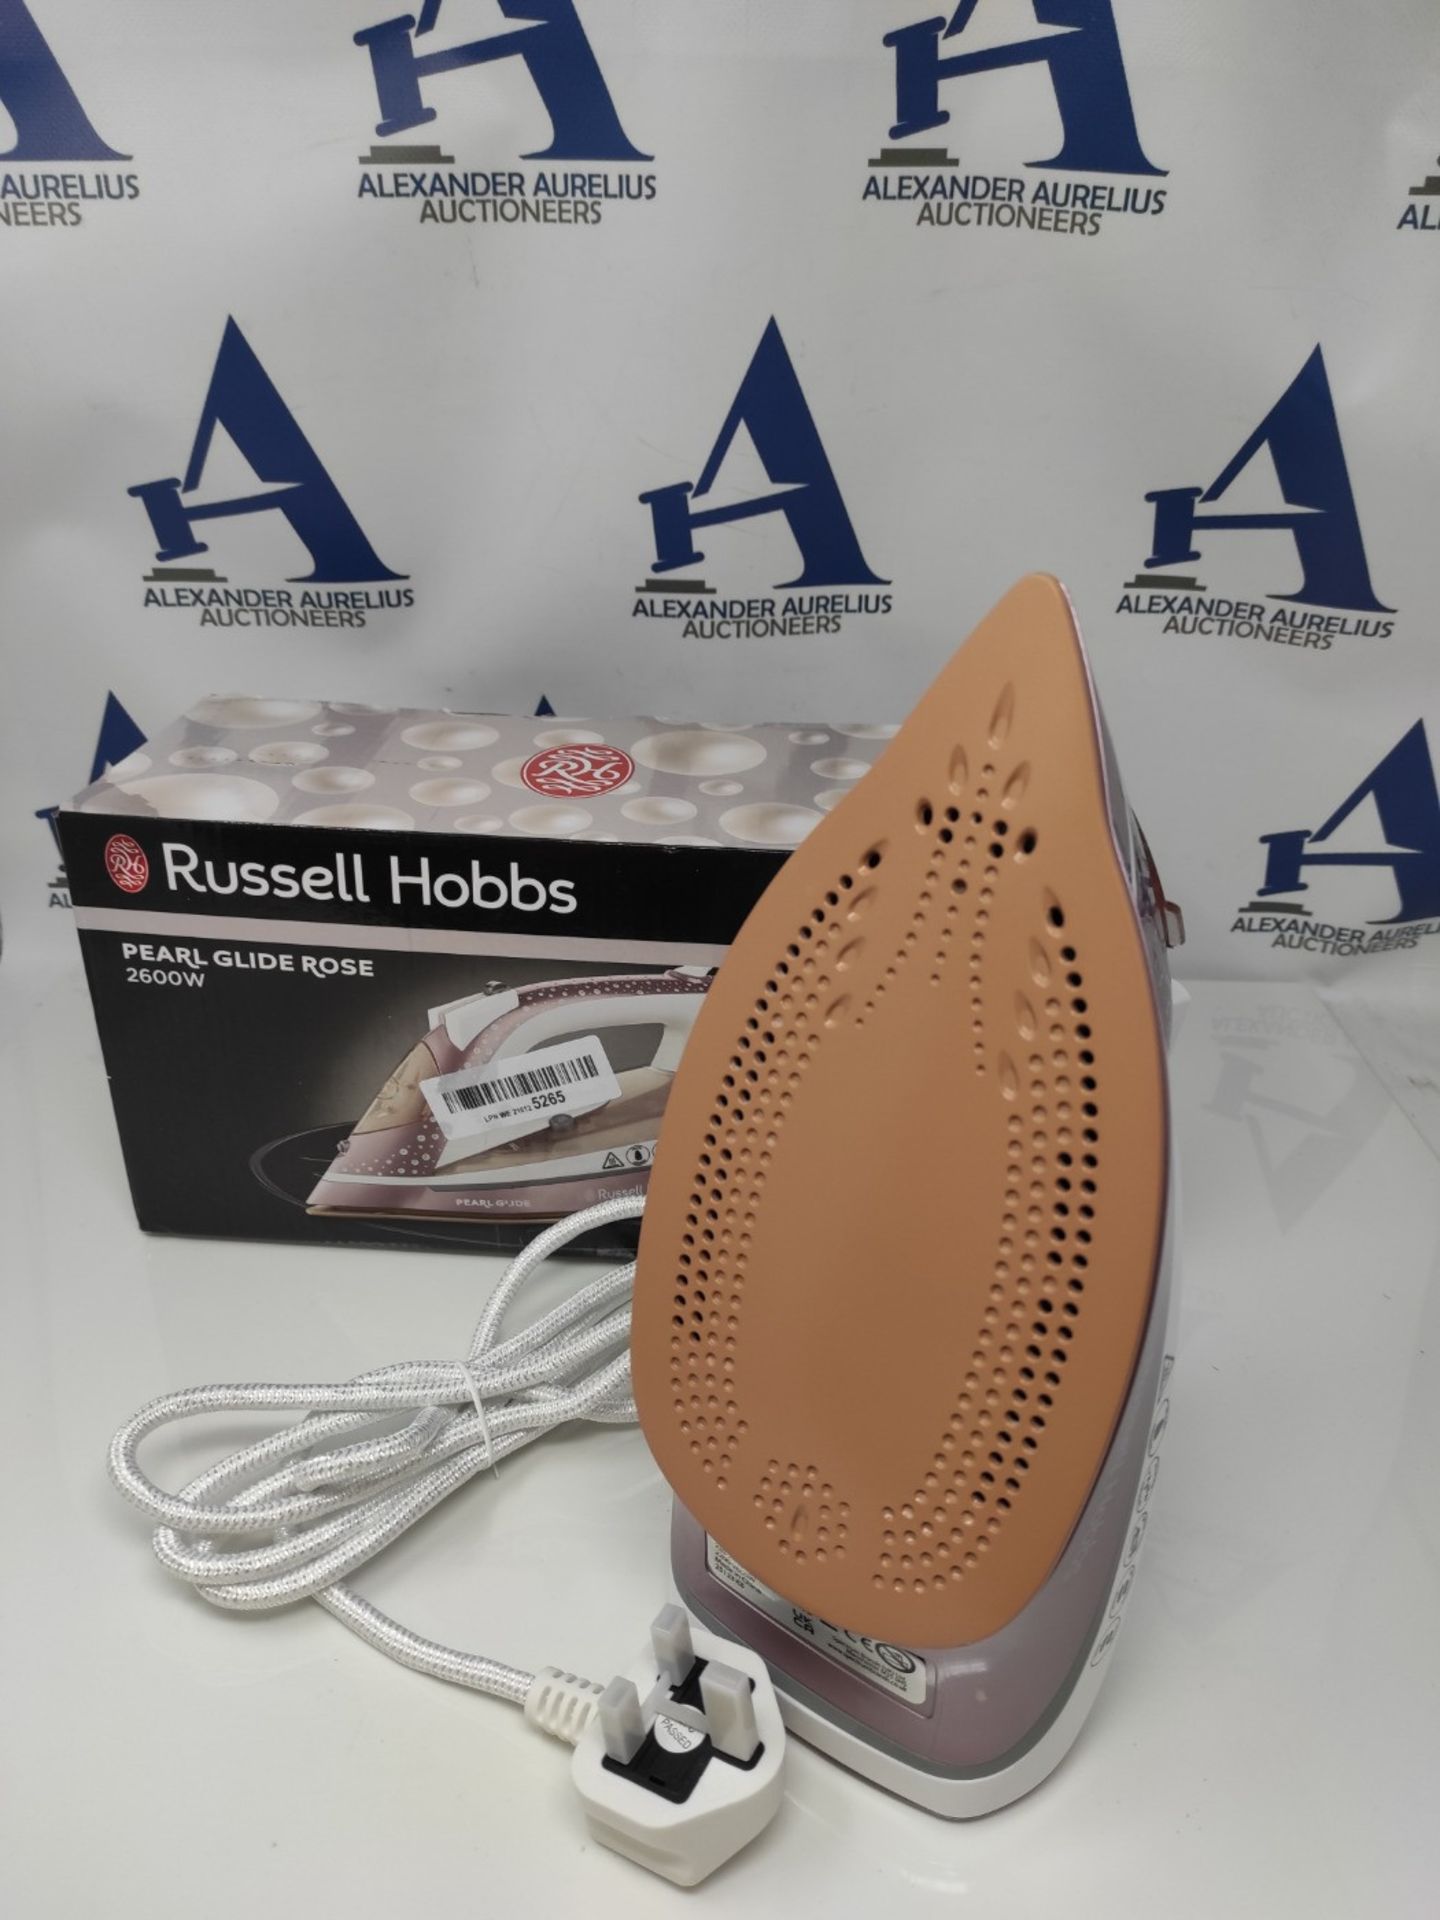 Russell Hobbs Pearl Glide Steam Iron with Pearl Infused Ceramic Soleplate, 315 ml Wate - Image 2 of 2